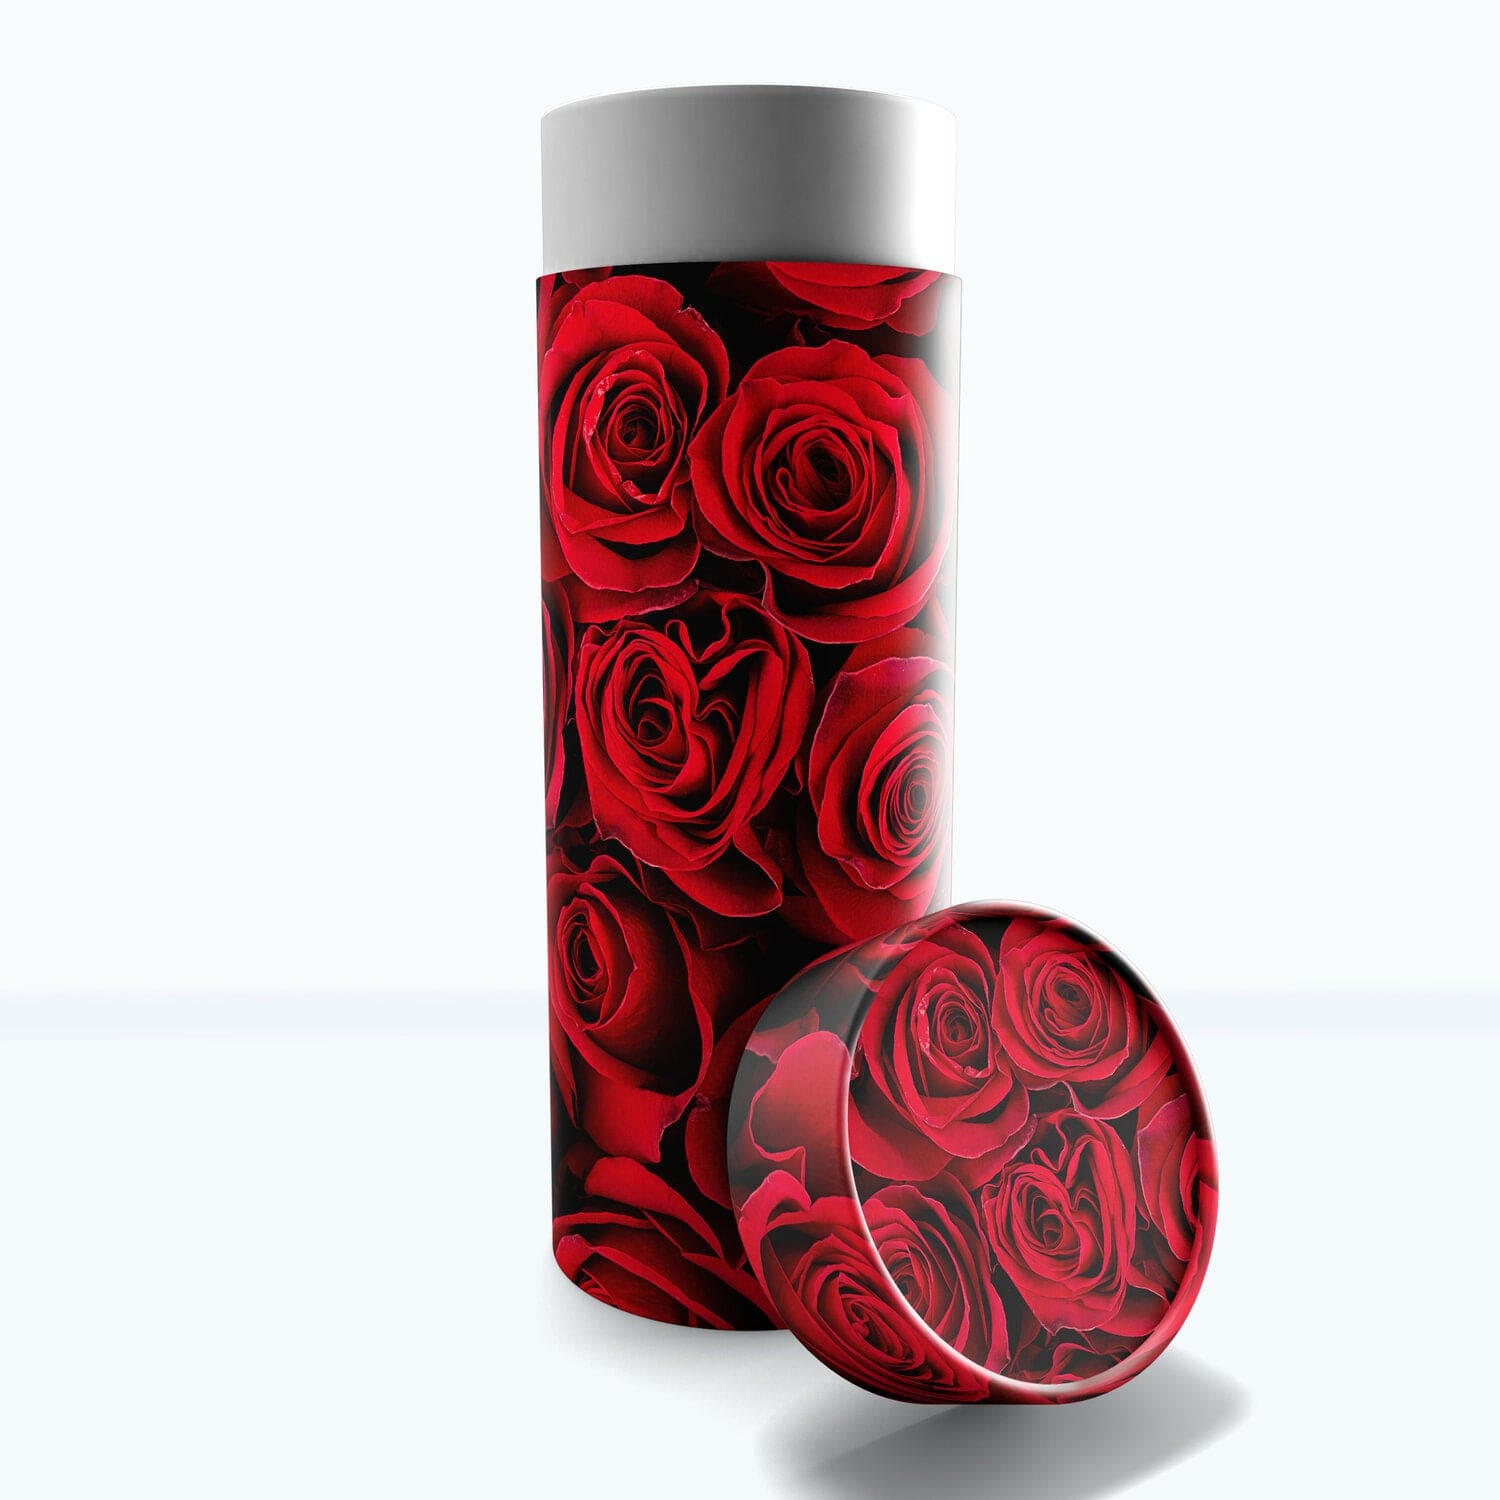 Commemorative Cremation Urns Small Crimson Rose Biodegradable & Eco Friendly Burial or Scattering Urn / Tube